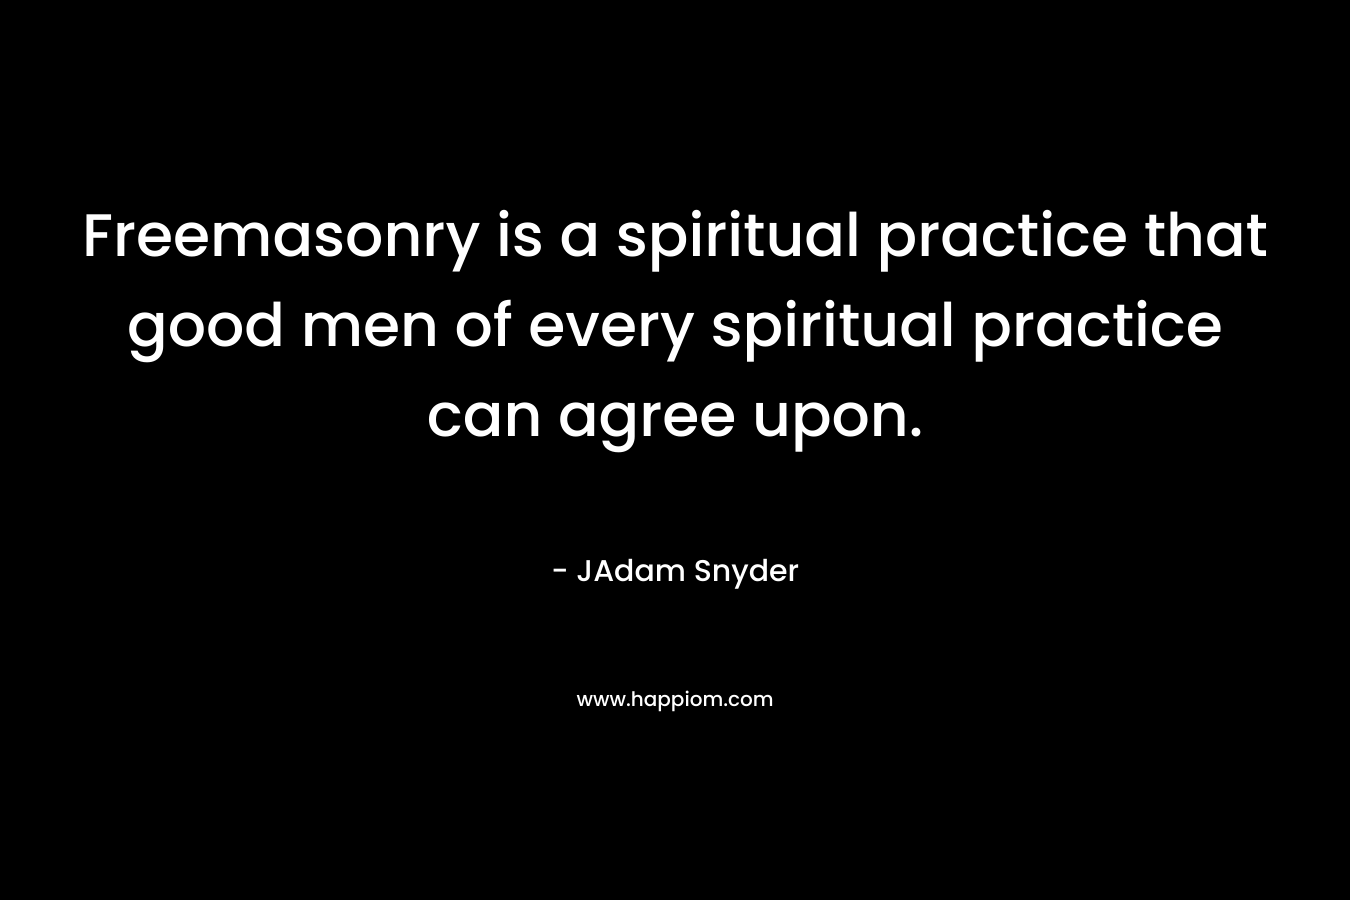 Freemasonry is a spiritual practice that good men of every spiritual practice can agree upon.